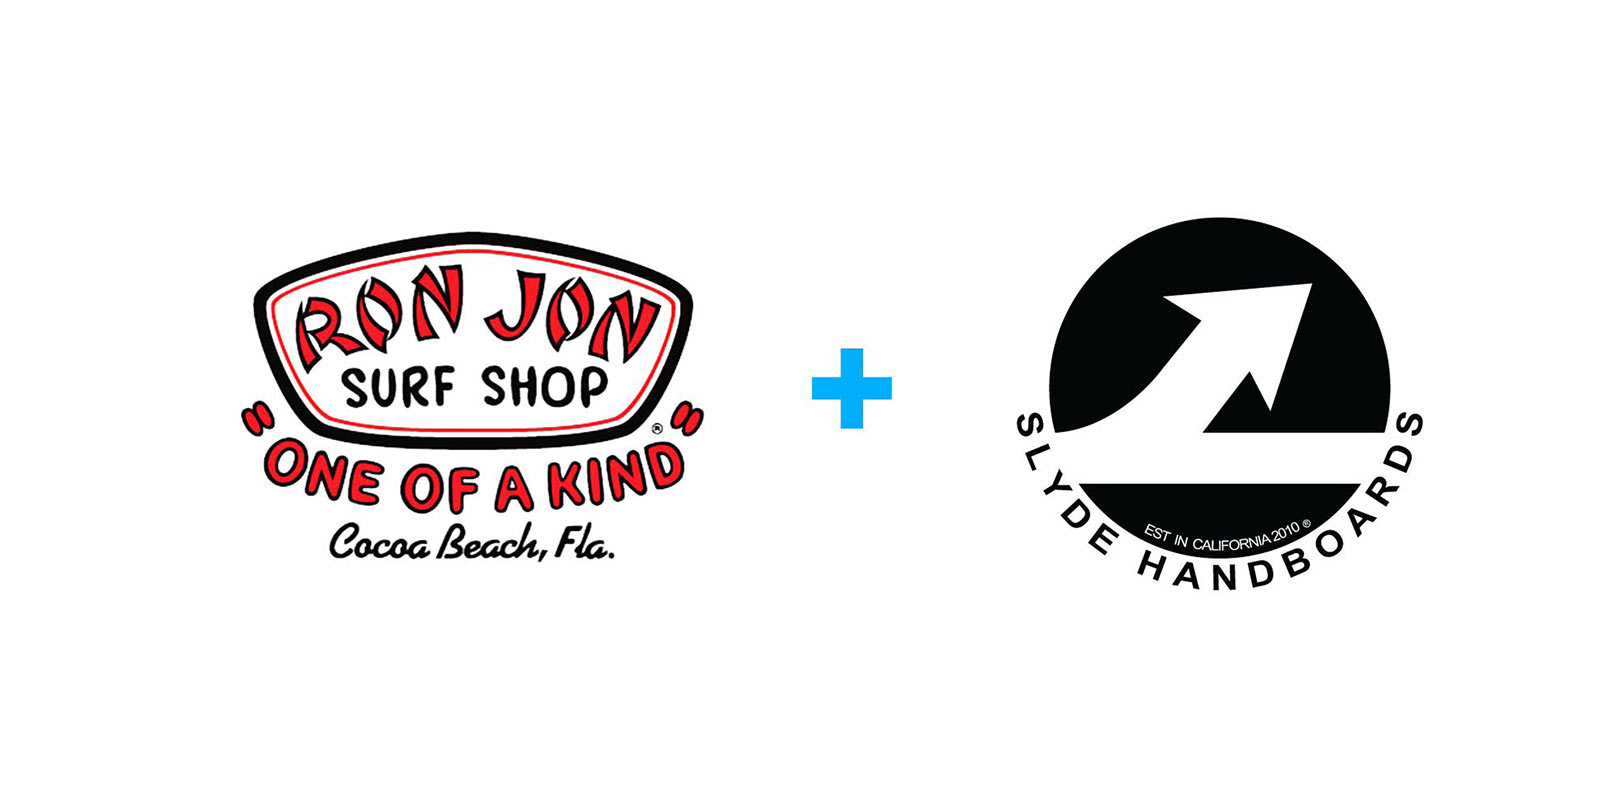 10 World-Famous Ron Jon Surf Shops Now Carry Slyde Handboards